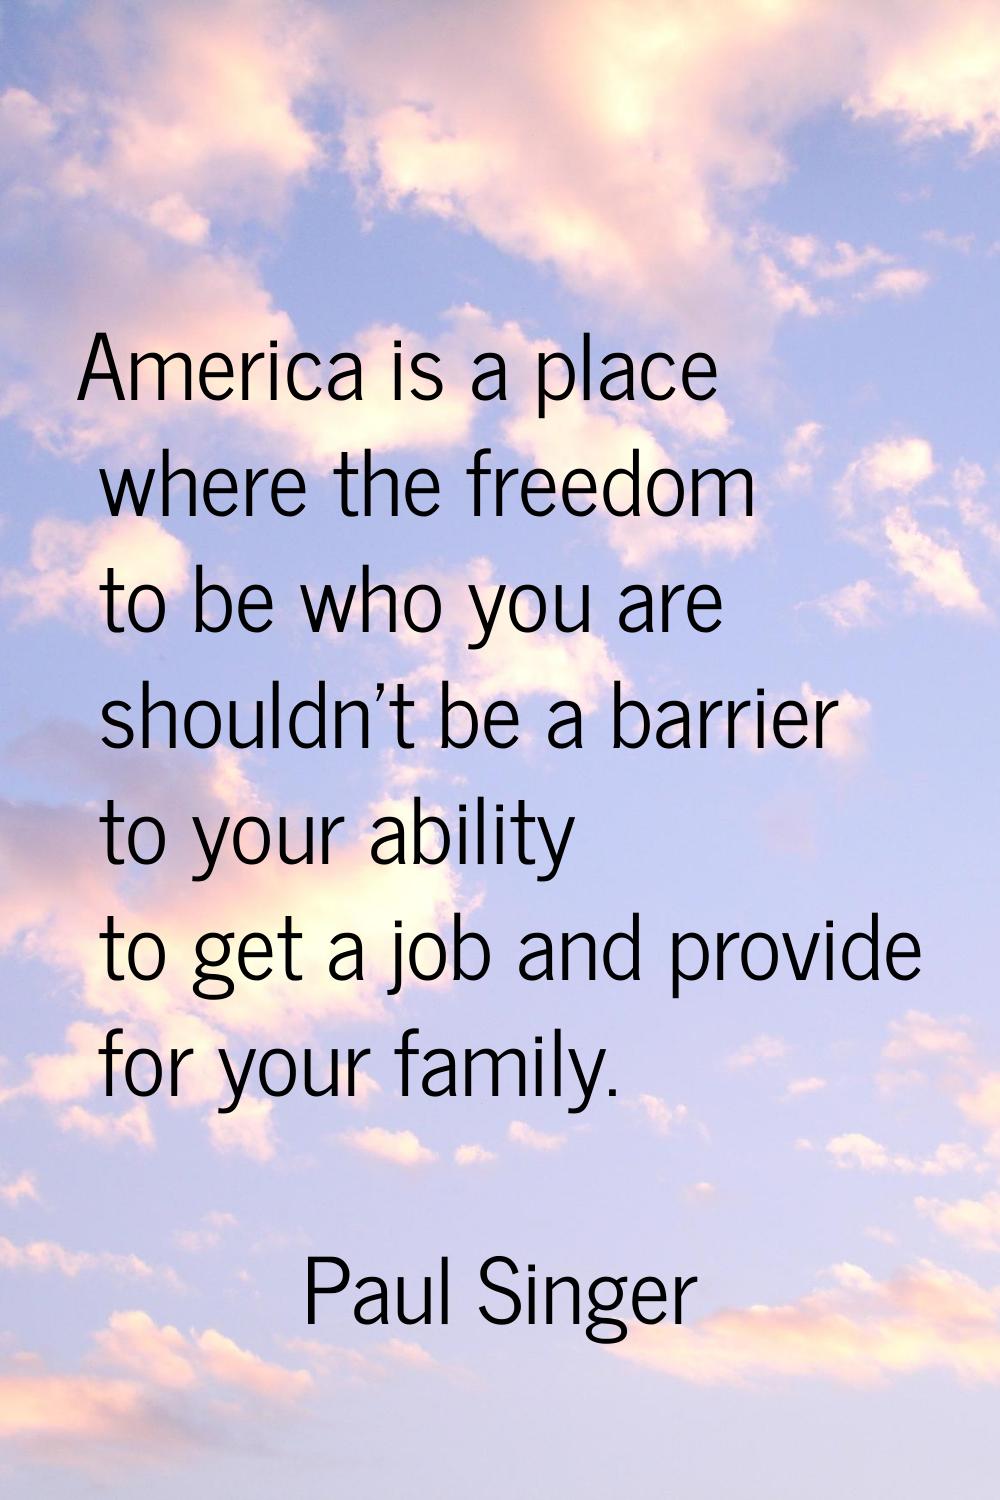 America is a place where the freedom to be who you are shouldn't be a barrier to your ability to ge